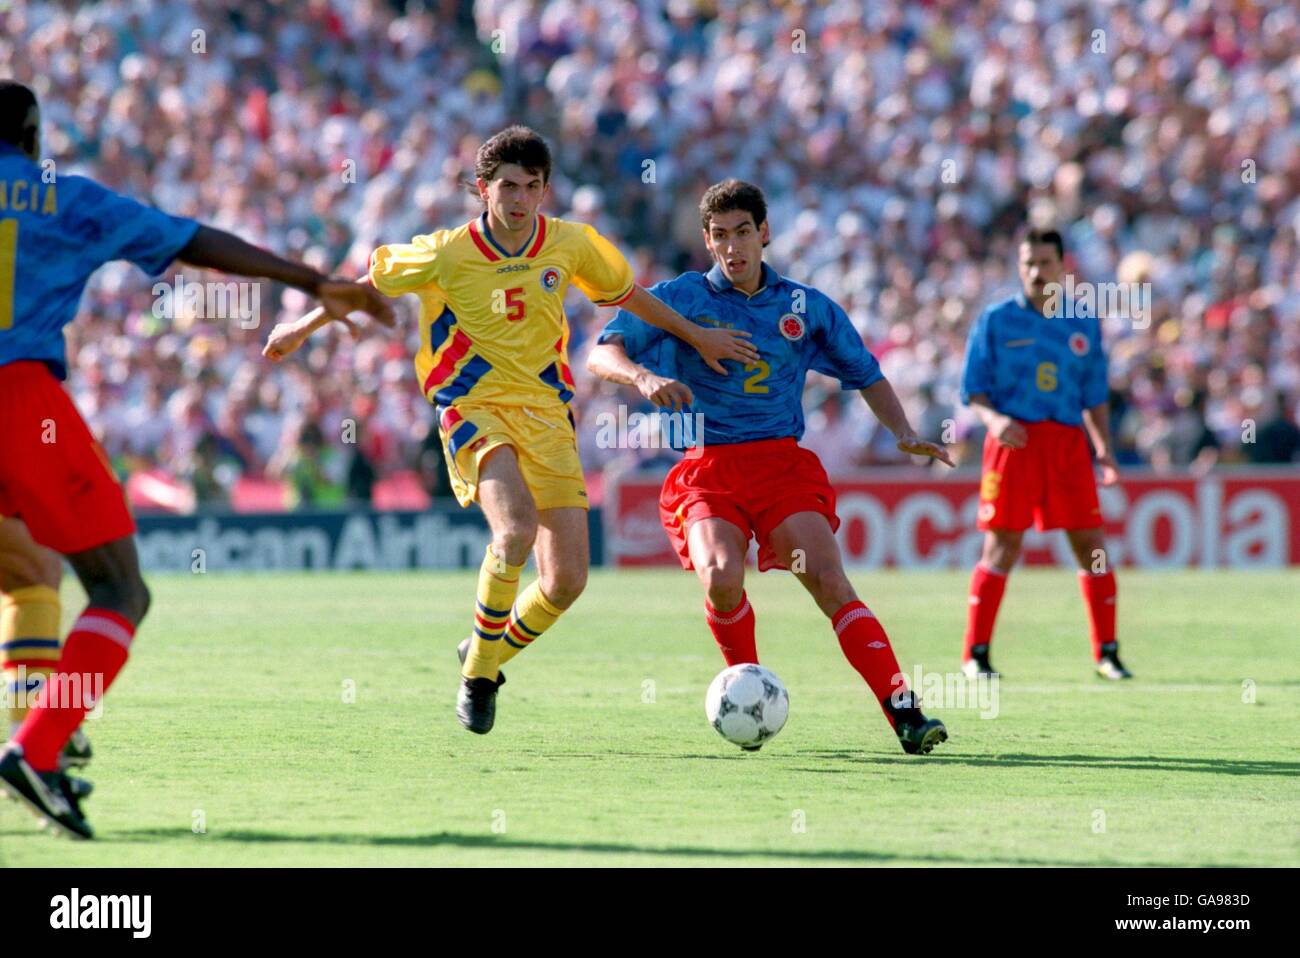 Soccer - World Cup USA 94 - Group A - Colombia v Romania. Colombia's Andres Escobar (r) plays the ball through before Romania's Ioan Lupescu (l) can tackle him Stock Photo